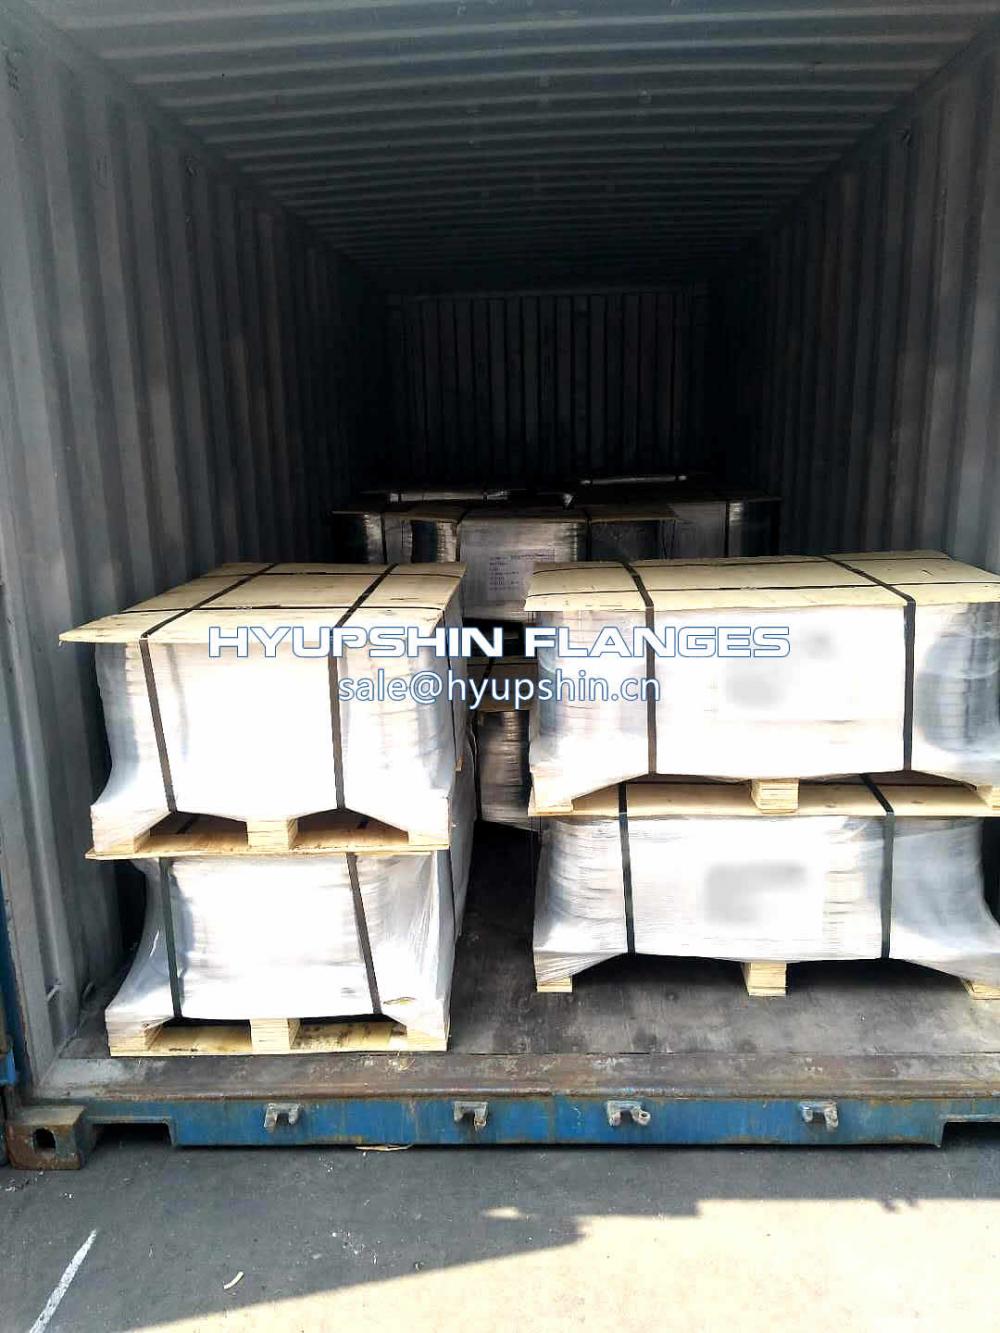 Hyupshin Flanges Export to UAE by Containers